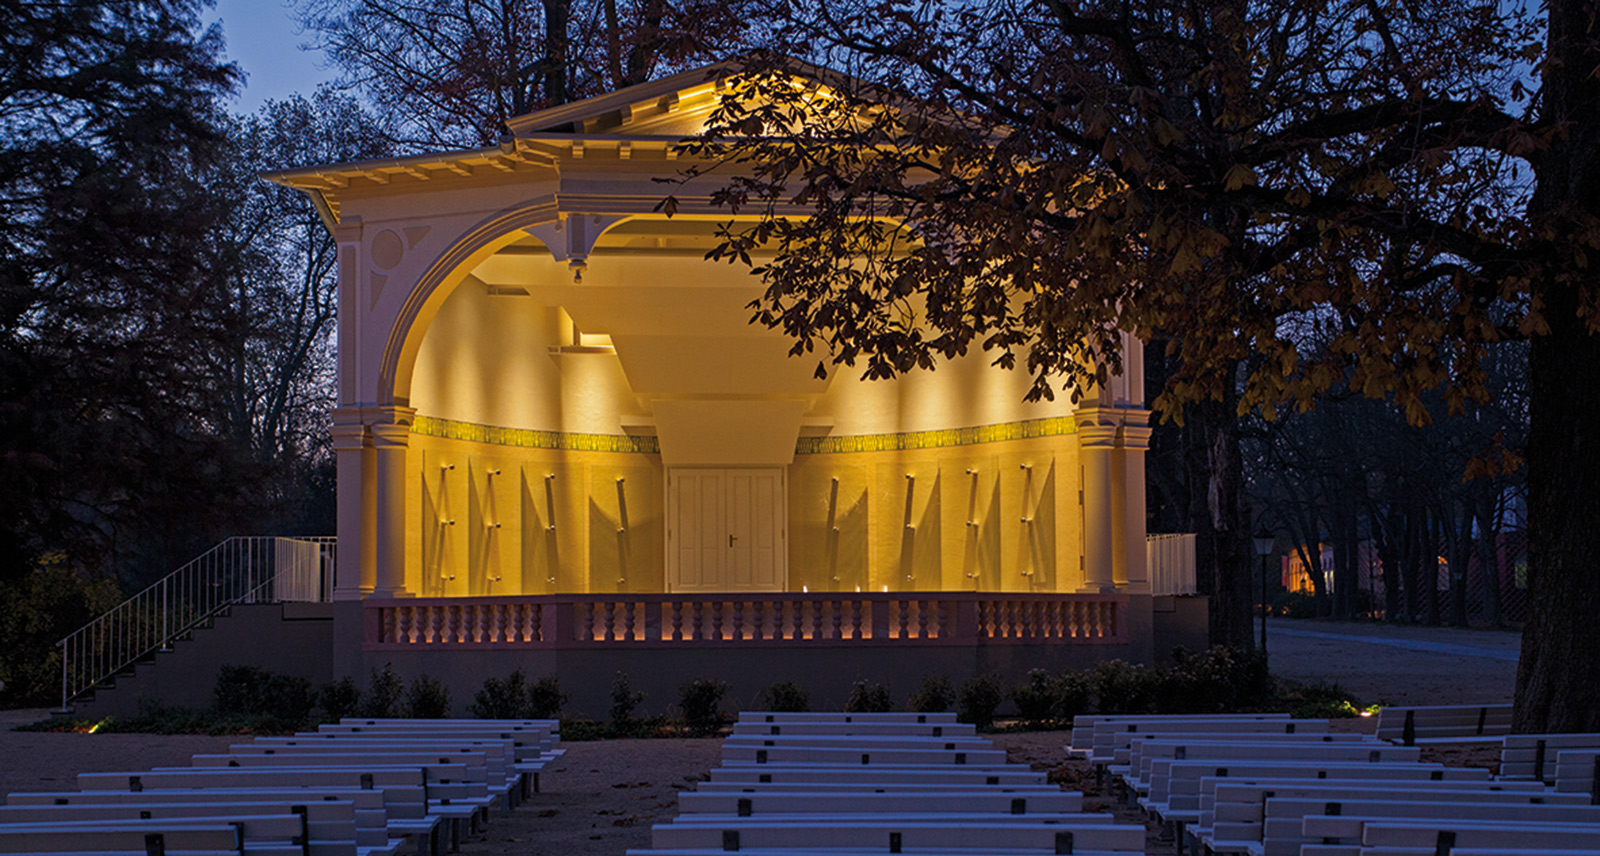 The Concert Pavillion in Bad Homburg's Kurpark, the perfect place to enjoy a night concert in the summertime!